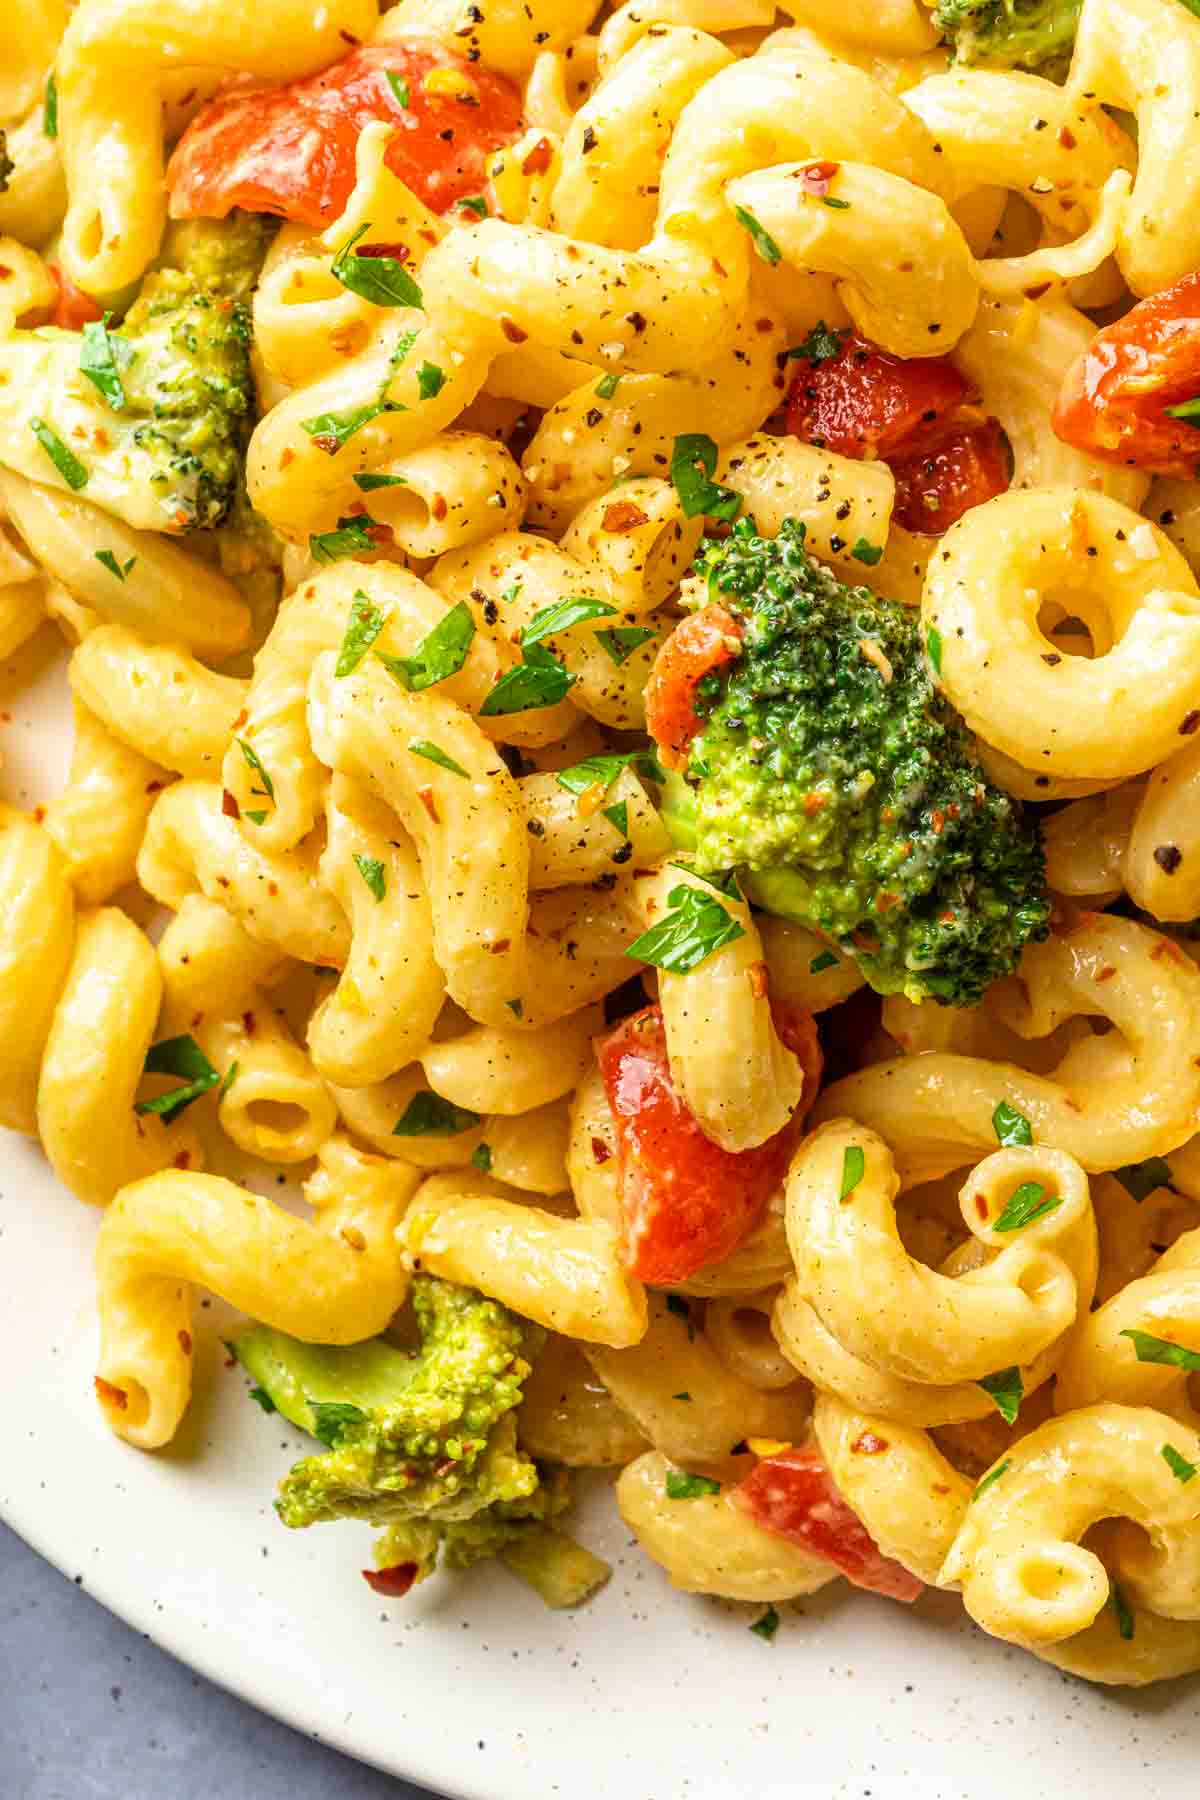 Close up of broccoli, roasted red peppers and cavatappi pasta on a plate, garnished with crushed red peppers and fresh parsley.